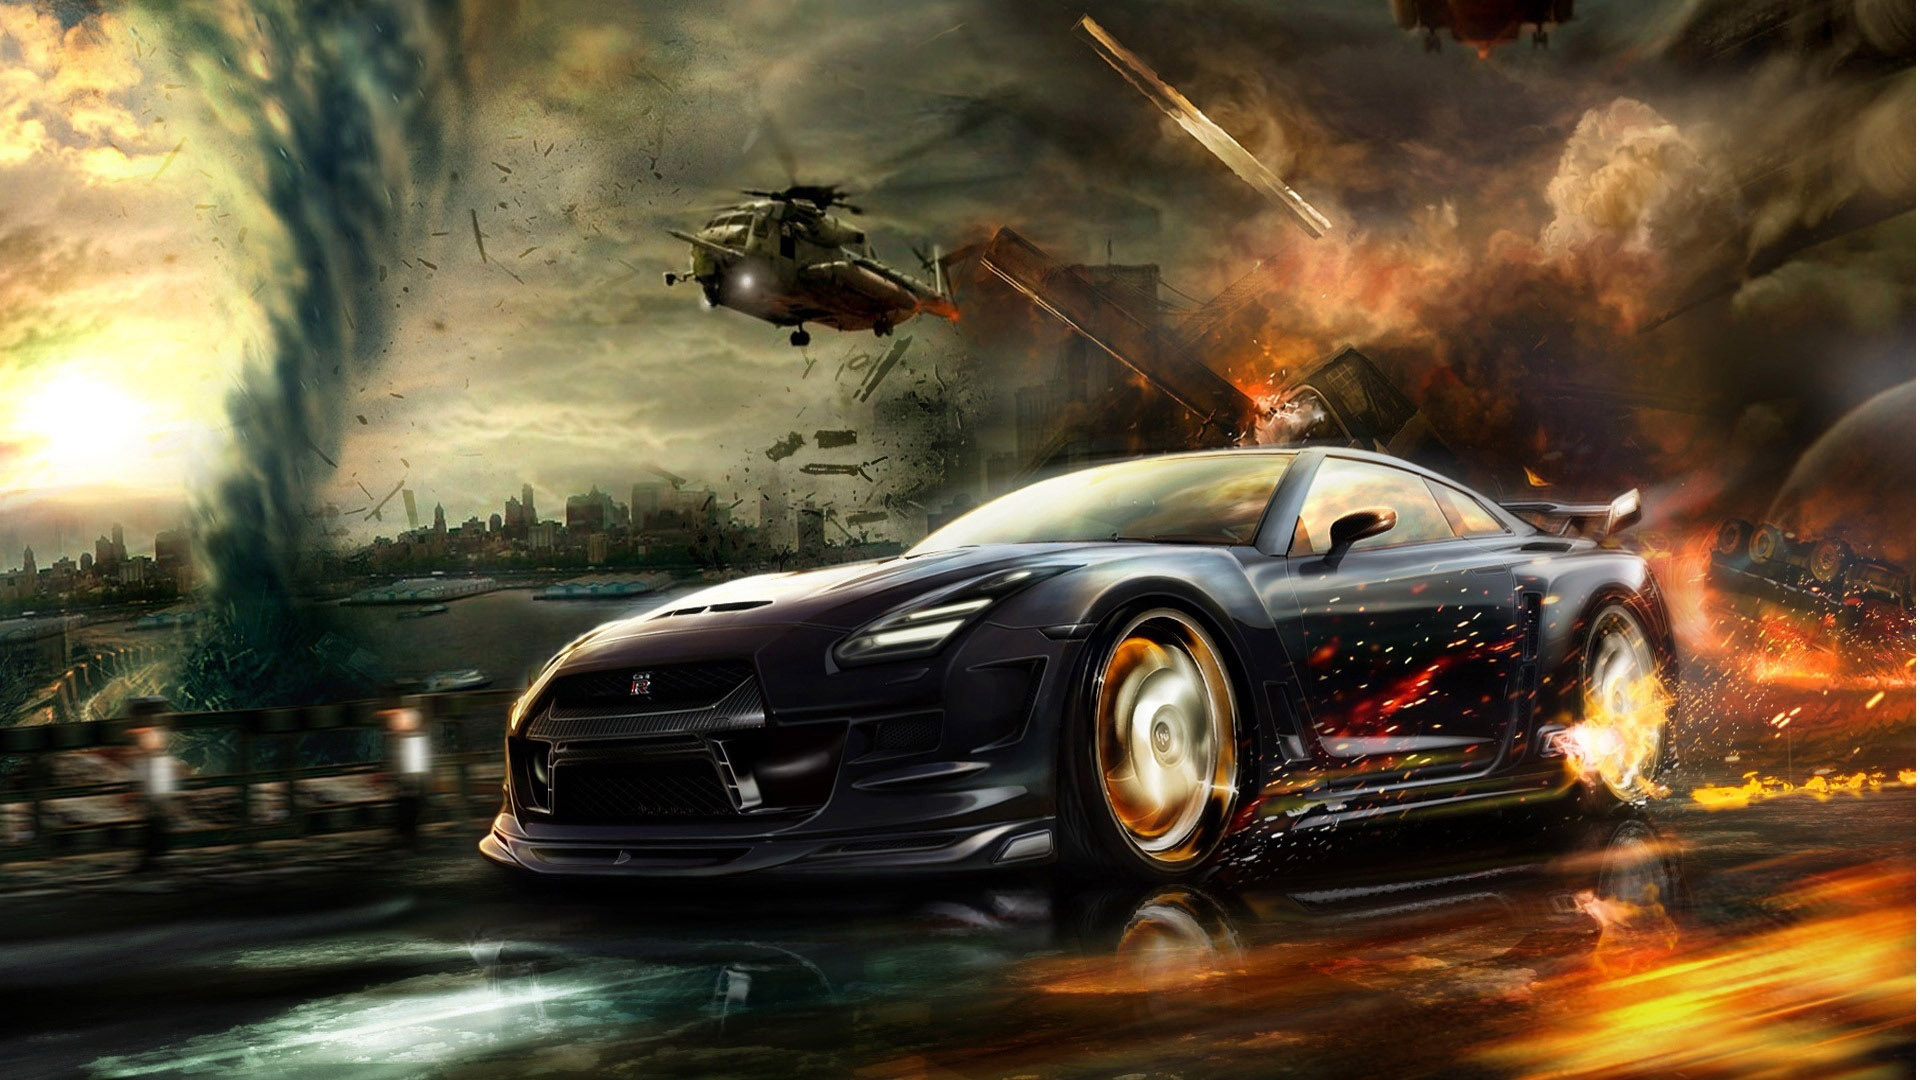 hd wallpaper game nfs car | wallpapers55.com - Best Wallpapers for ...